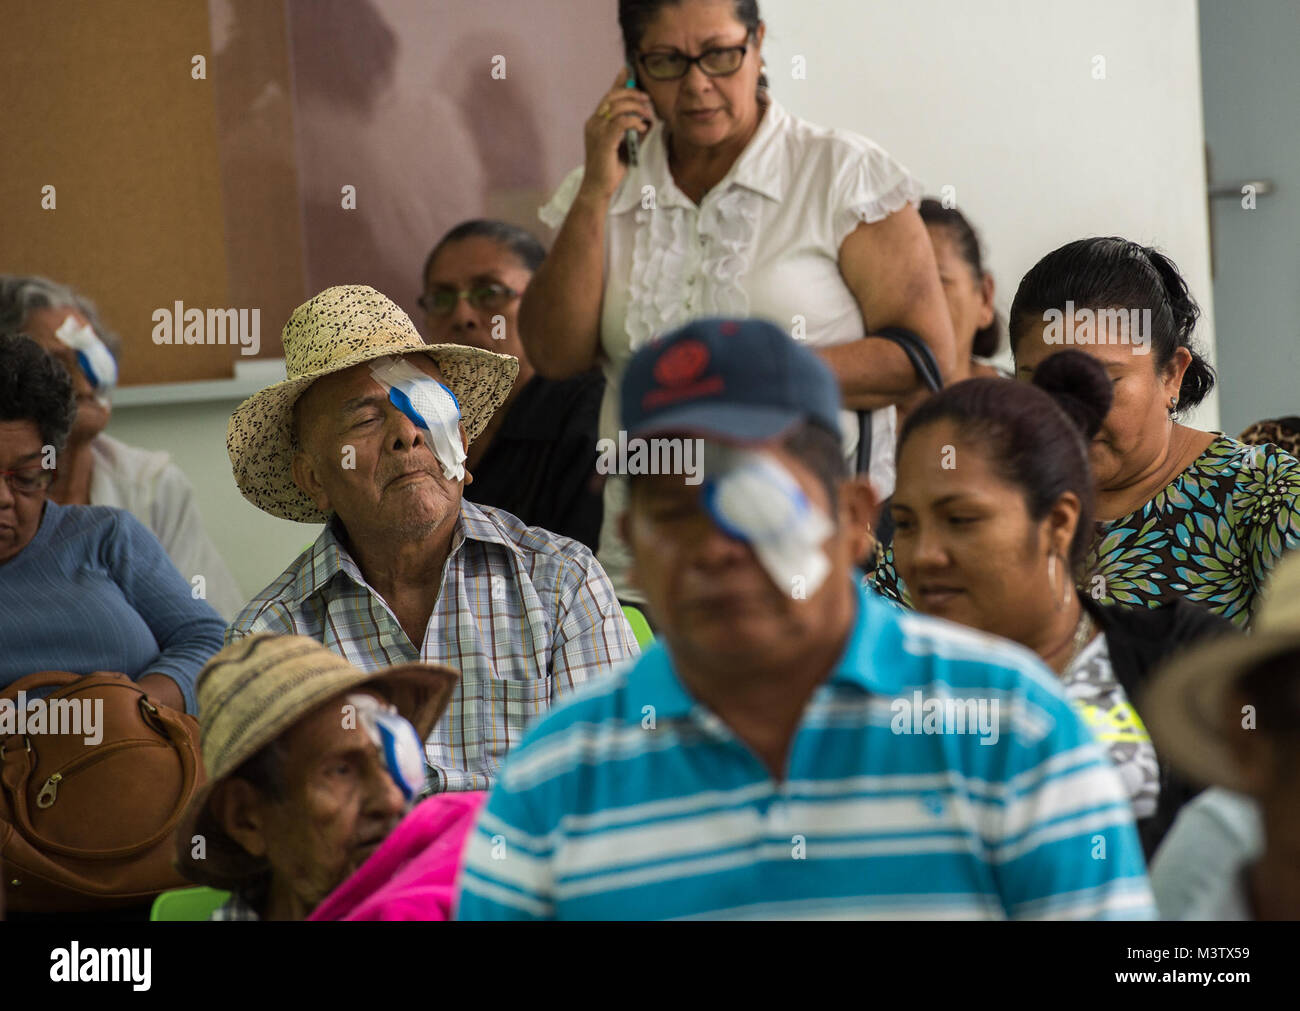 Eye surgery patients wait for their follow-up appointments, Feb. 6, 2017, after getting cataract surgery at the Centro Hospitalario Luis 'Chicho' Fabrega, Santiago, Panama, during a medical readiness training exercise. A U.S. military medical team was in Panama to help treat individuals with cataracts that otherwise would have gone untreated. Medical readiness training exercises provide U.S. military personnel training in delivery of medical care in austere conditions, promote diplomatic relations between the U.S. and host nations in Central America and provide humanitarian and civic assistanc Stock Photo